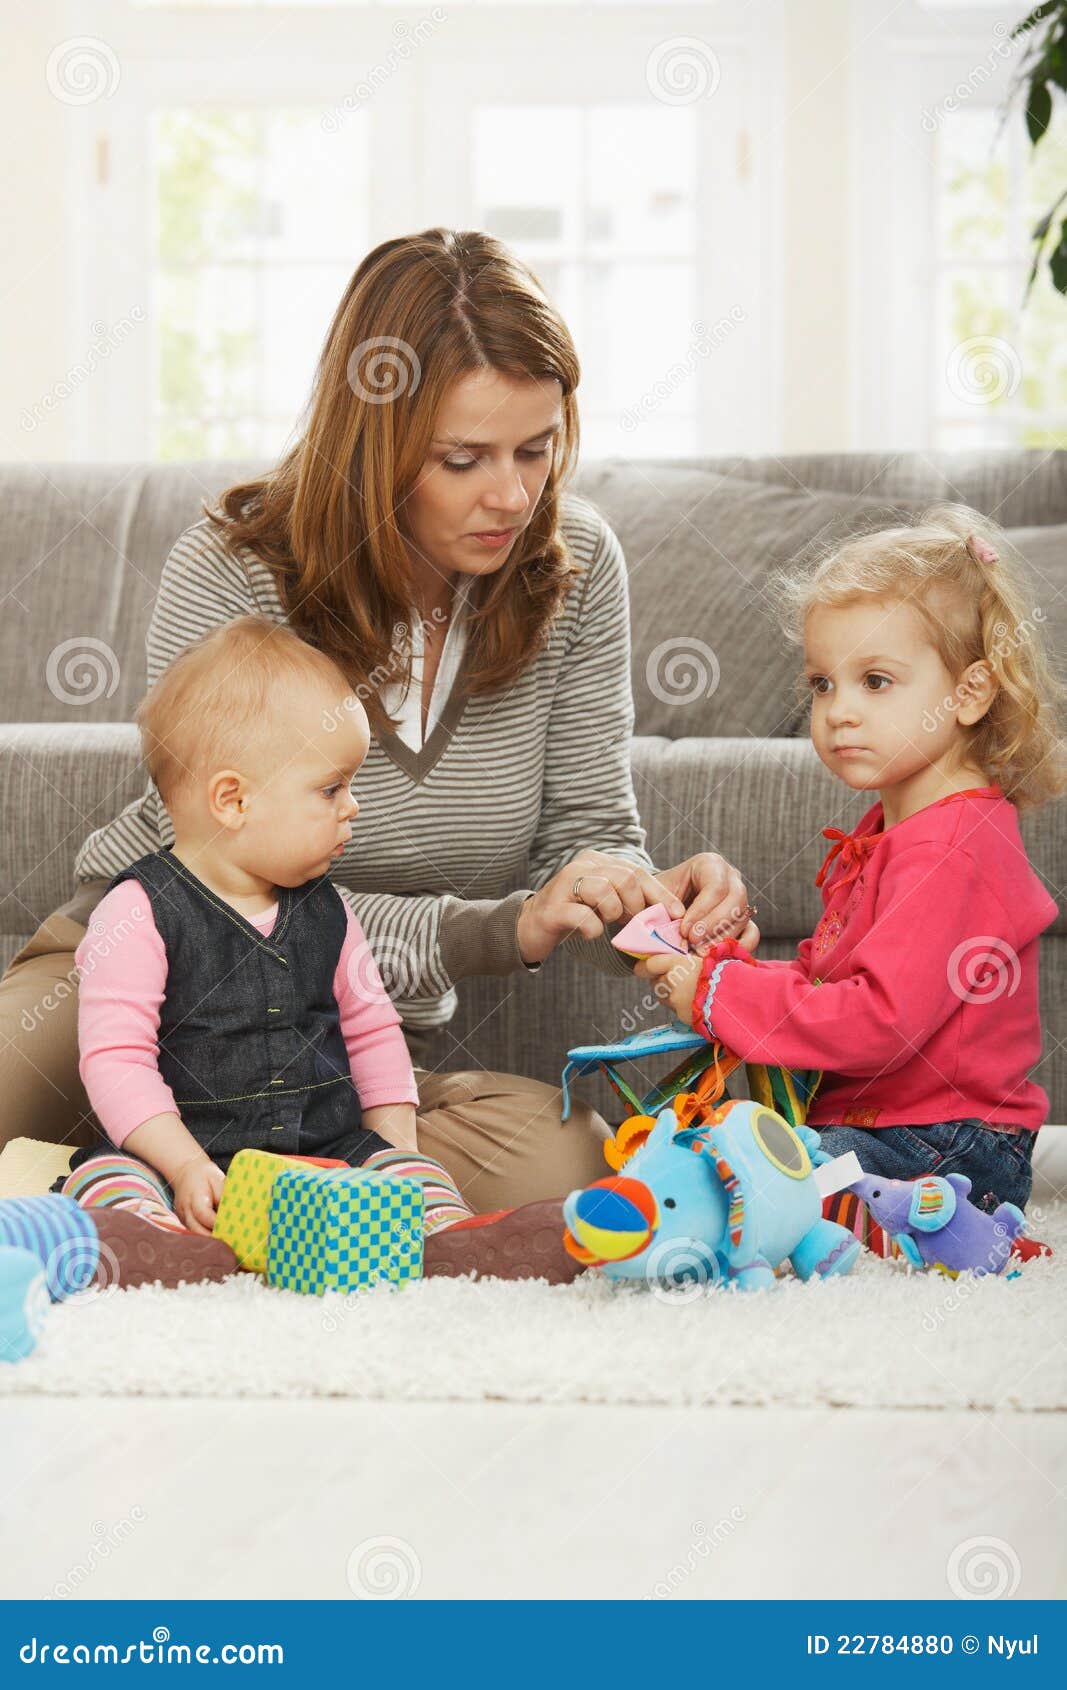 mum playing with two daughters